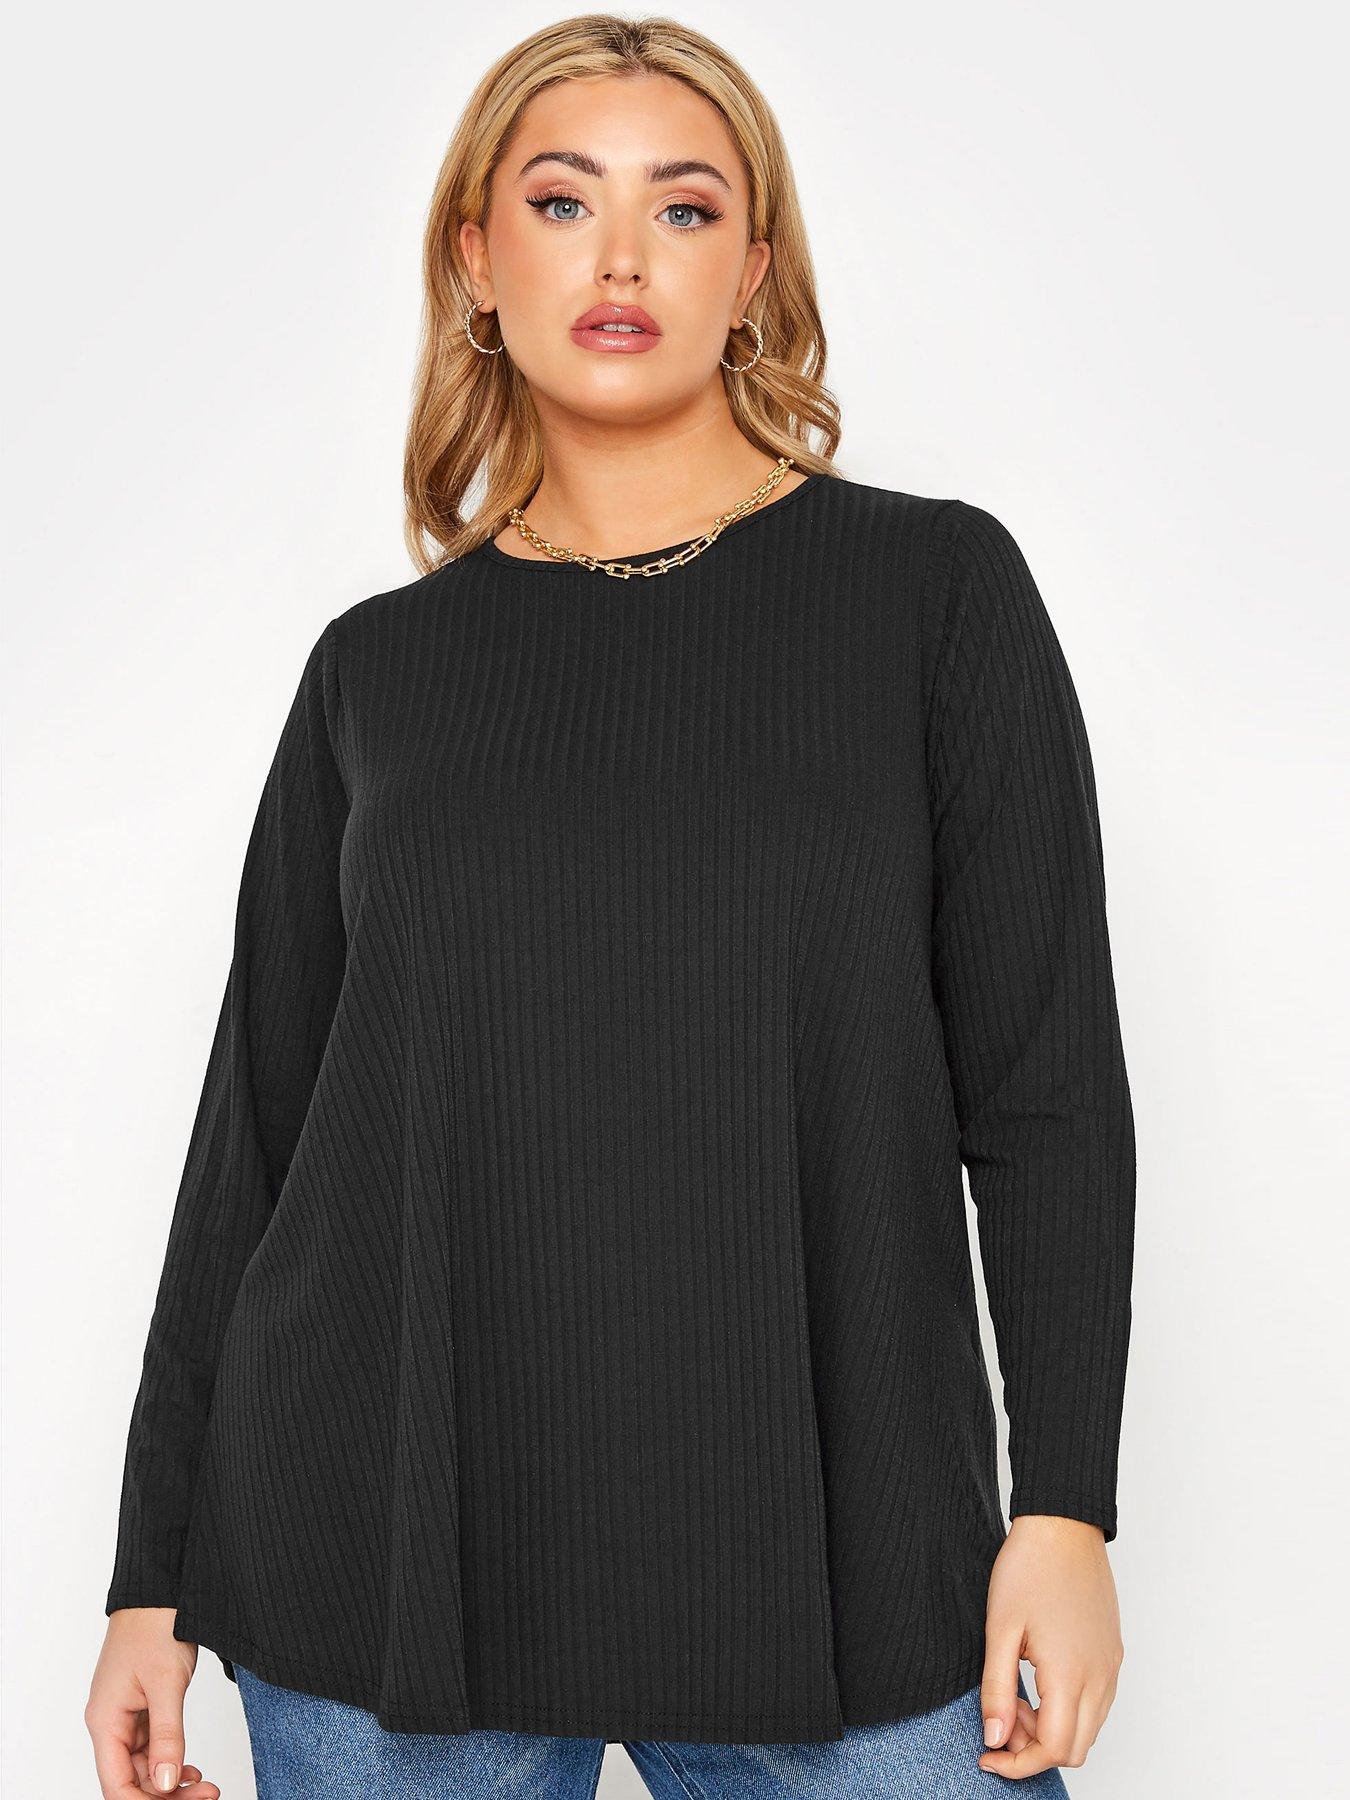 Women Limited Collection Long Sleeve Rib Swing Tee Black